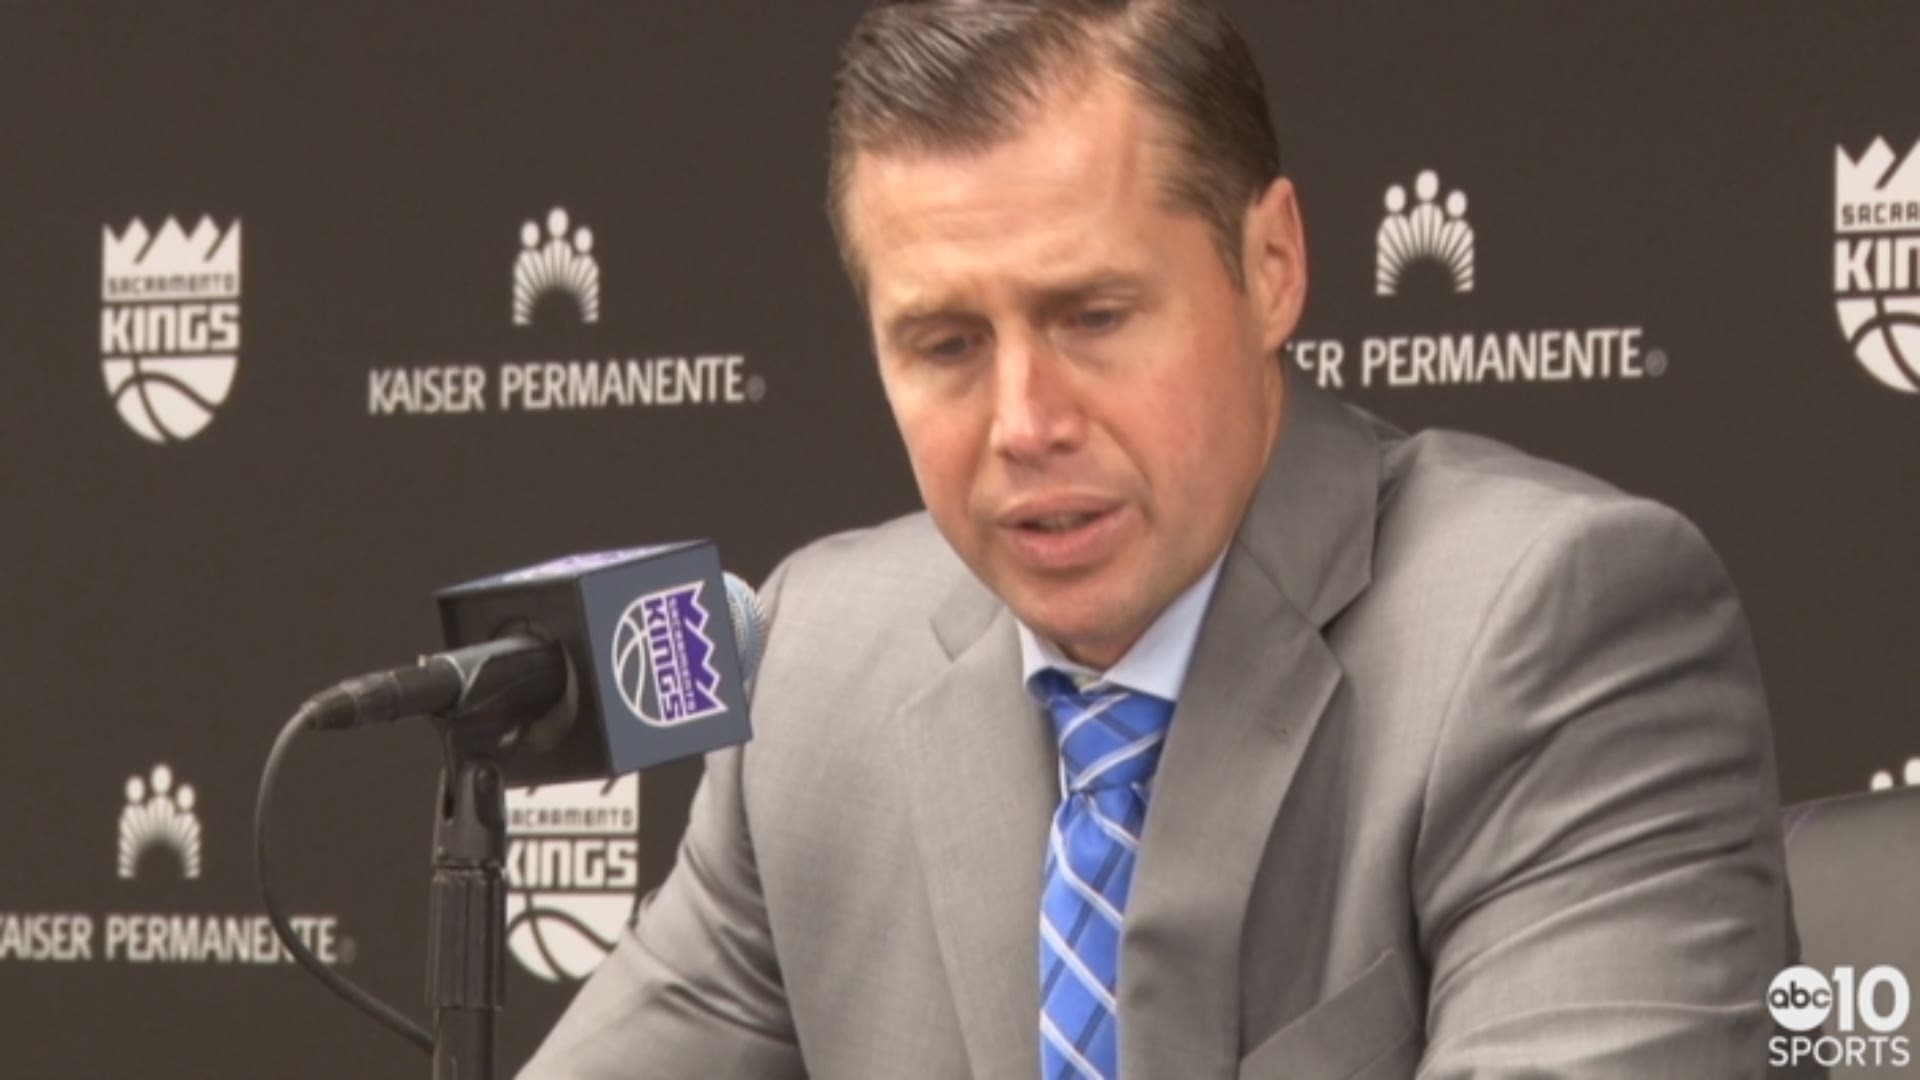 Kings head coach Dave Joerger gives his thoughts on Tuesday's win in Sacramento over the Oklahoma City Thunder and the play from Zach Randolph in the second half at the center position.